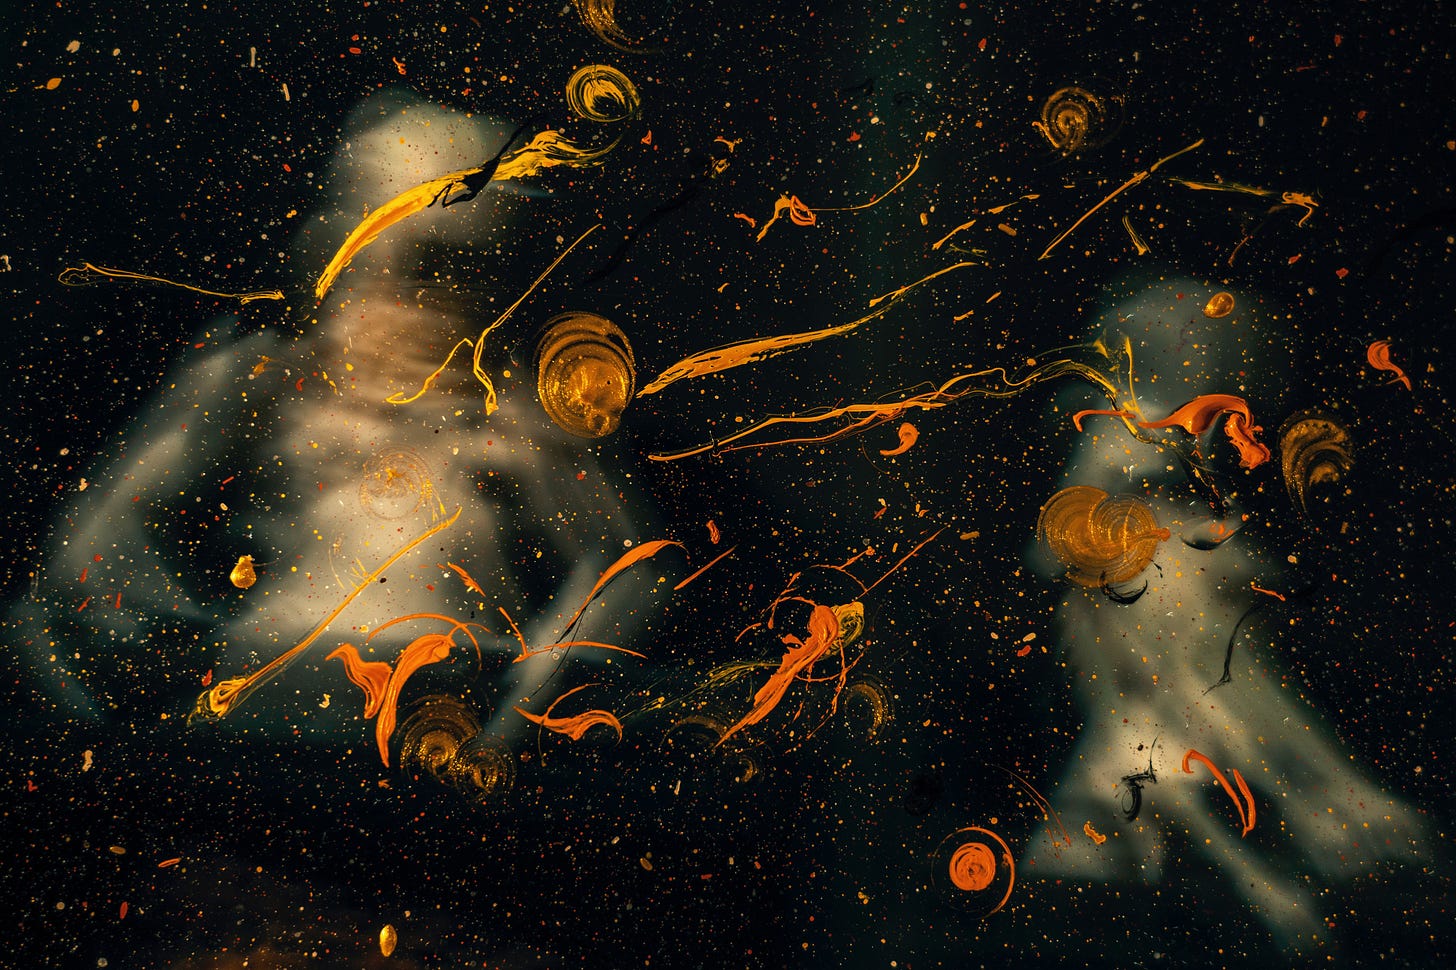 Abstract painting with a black background, 2 ghostly abstract figures and splashes and swirls of orange and yellow paint.